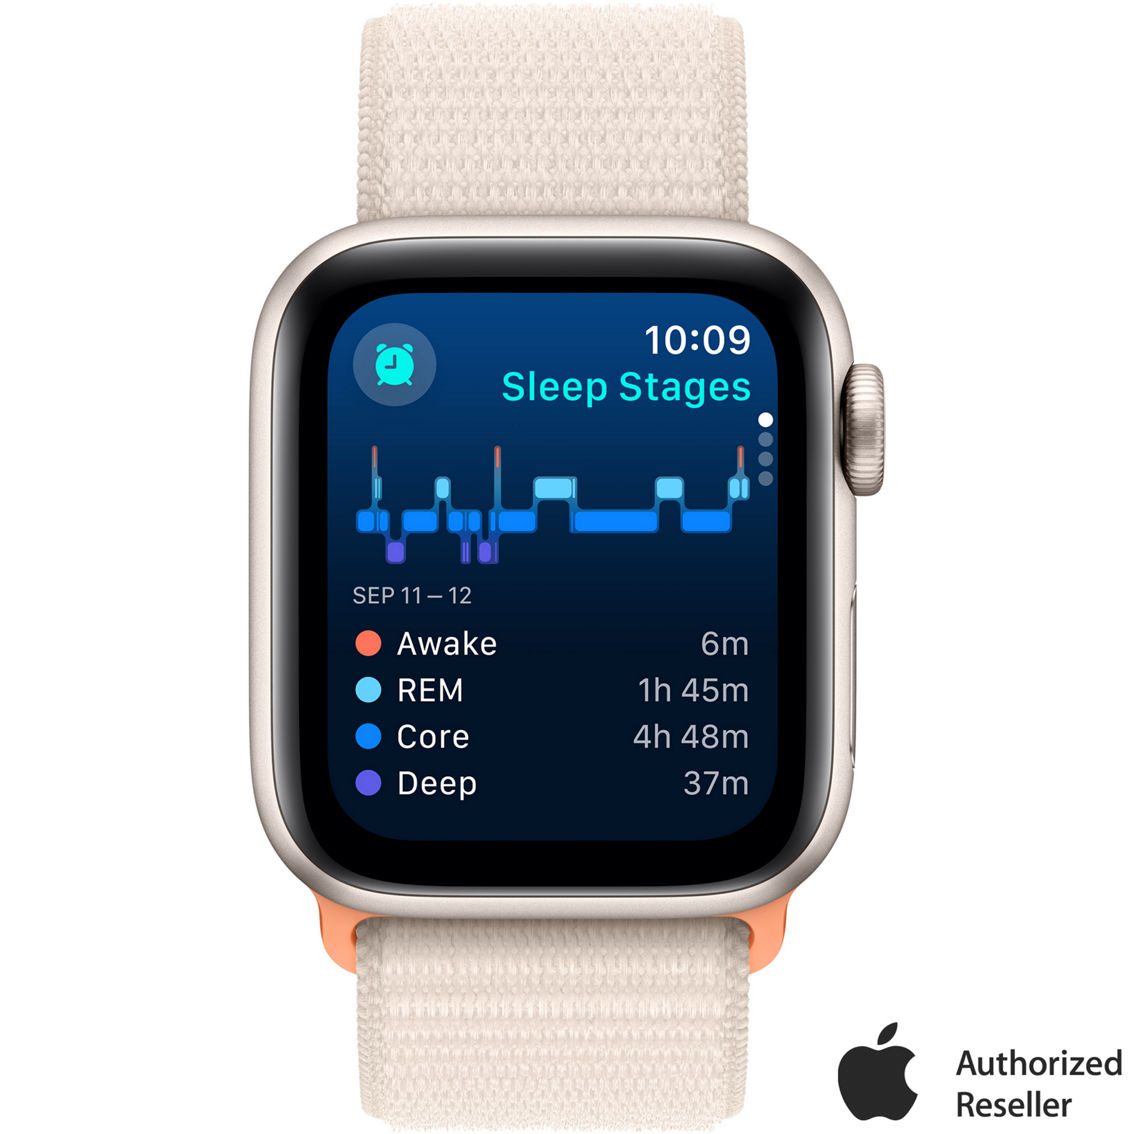 Apple Watch SE GPS 40mm Aluminum Case with Sport Loop Band - Image 6 of 10